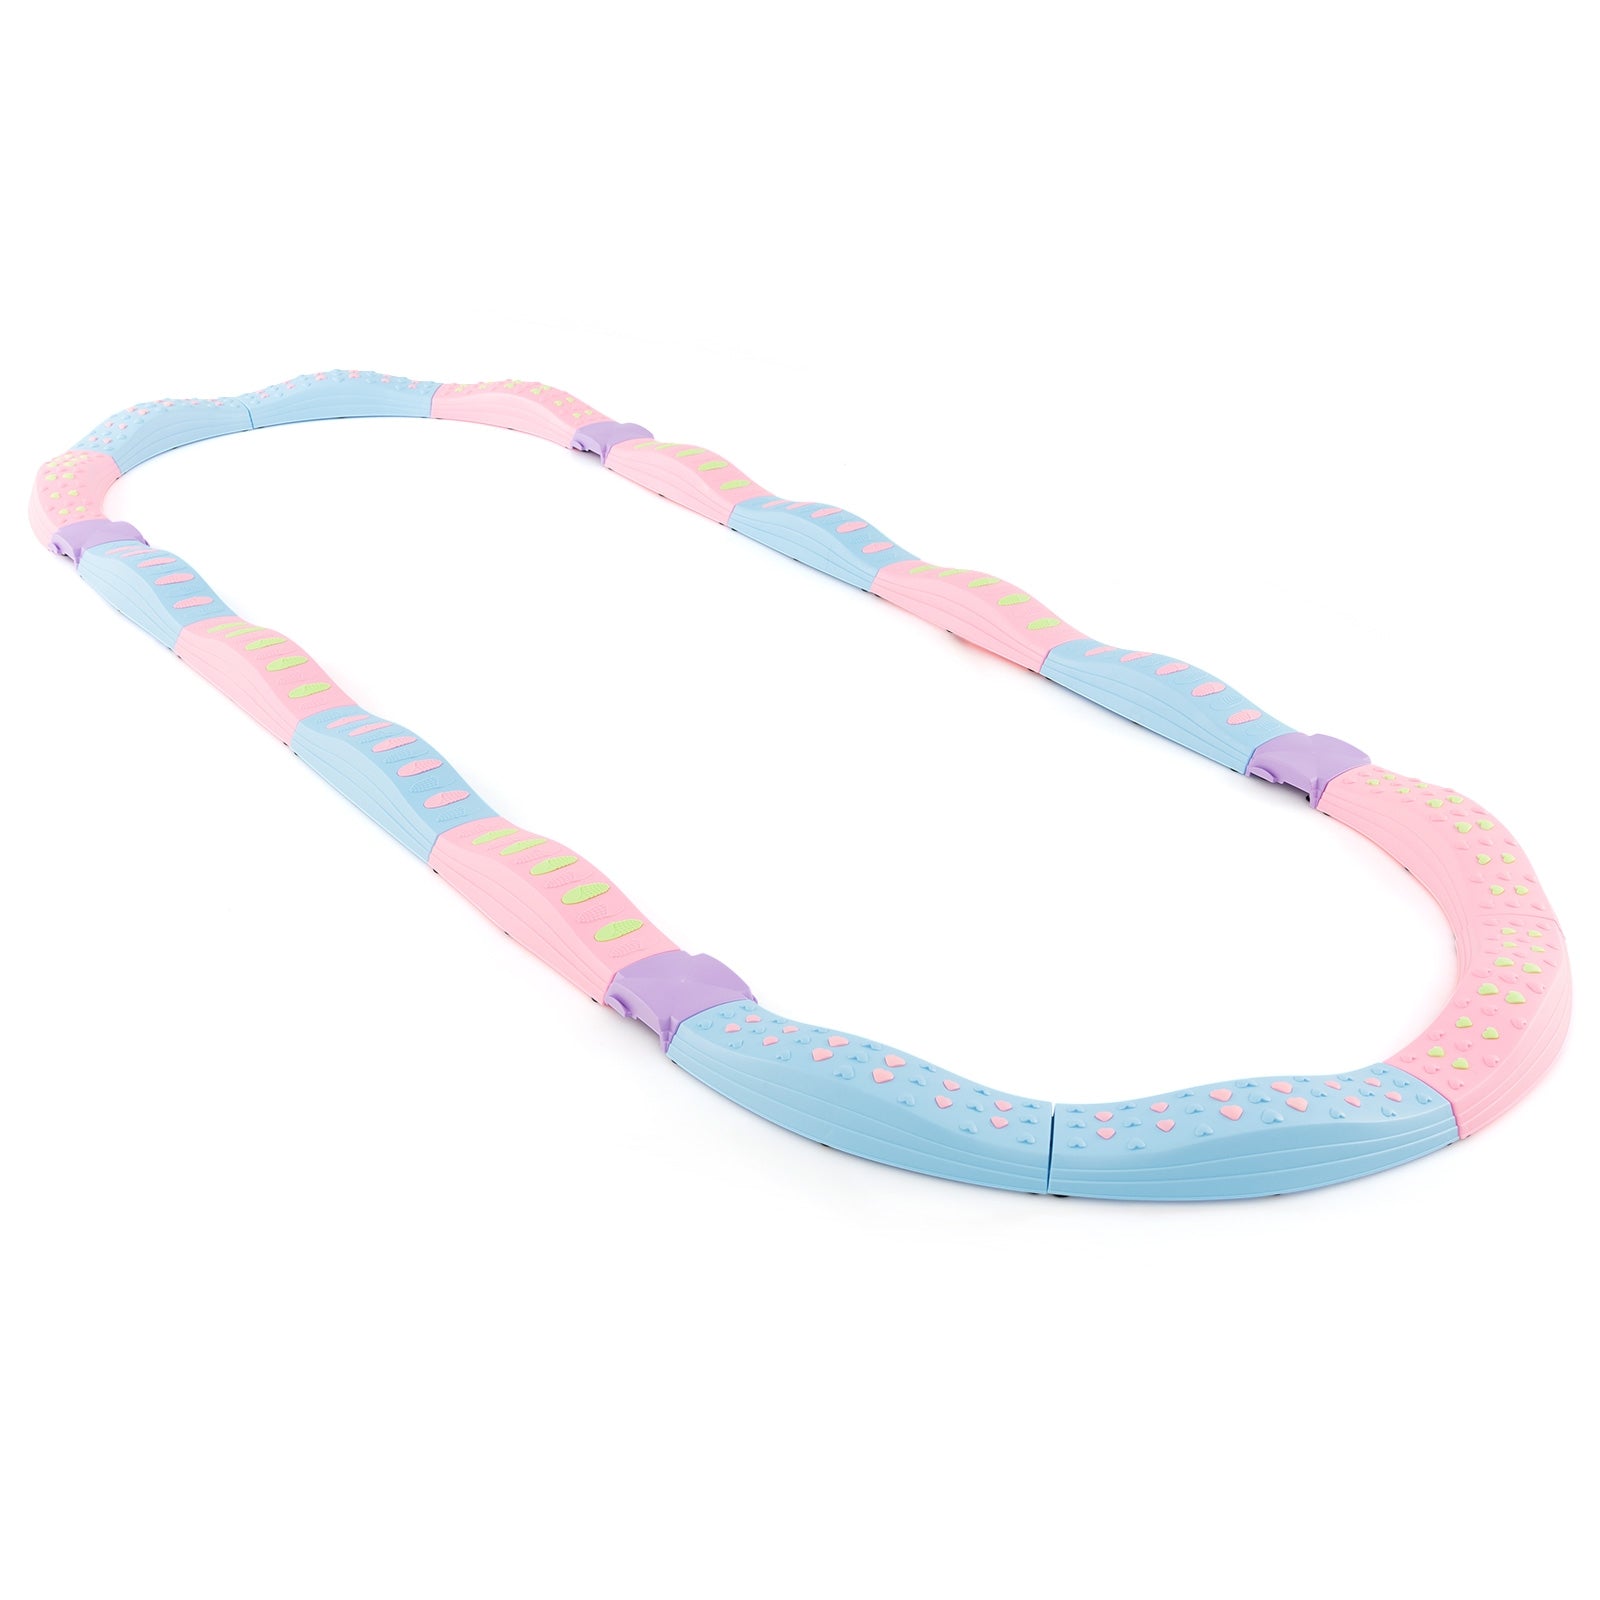 Colorful Kids Wavy Balance Beam with Textured Surface and Non-slip Foot Pads-Blue and Pink, Pink & Blue - Gallery Canada